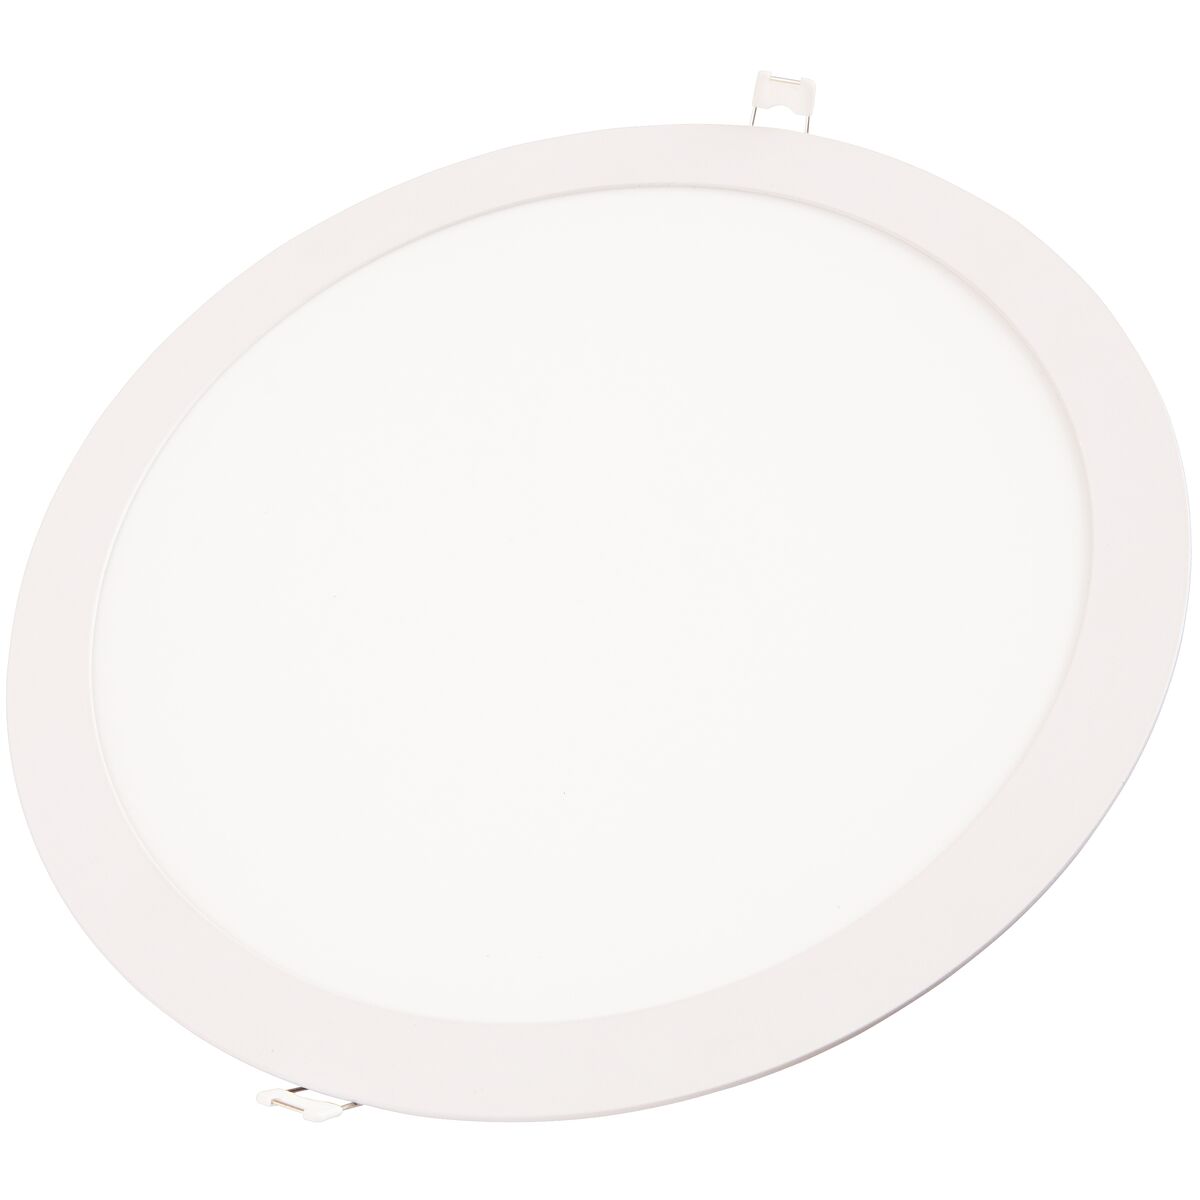 Tramontina 1920 lm 24 W 6500 K Round Recessed LED White Ceiling Light